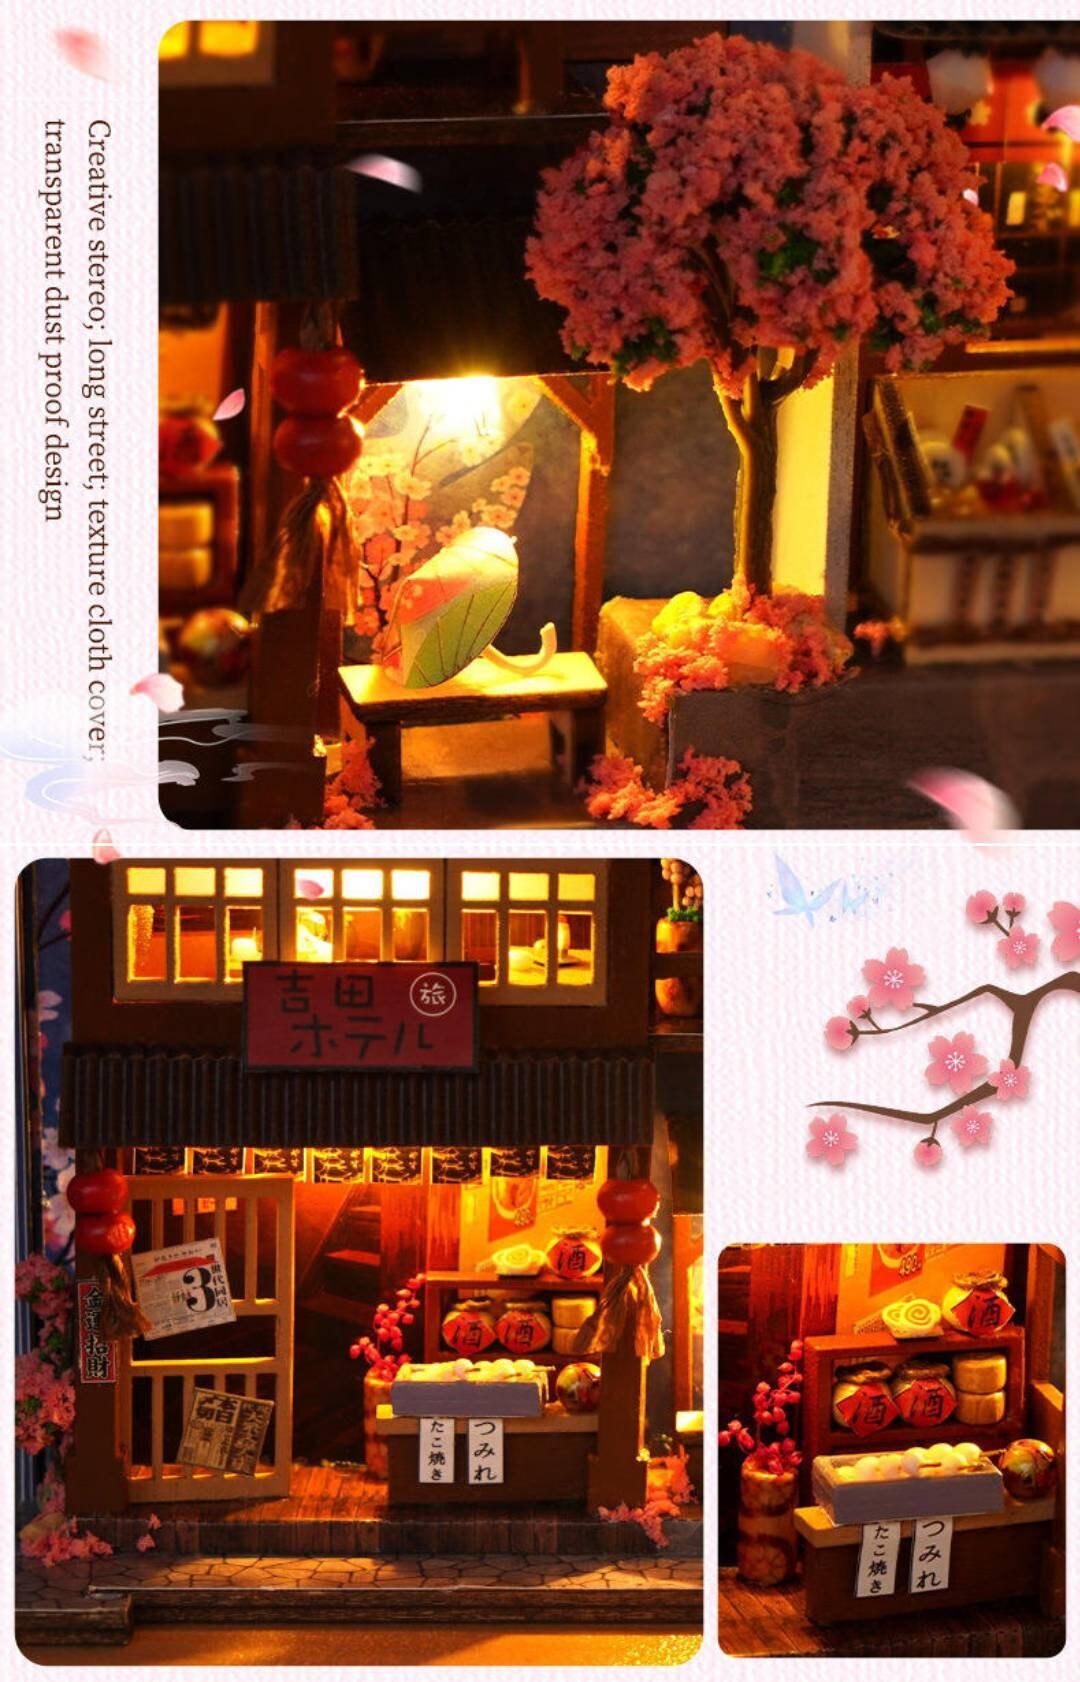 Chongqing Alley Book Nook - DIY Book Nook Kit - Chinese Alley Book Scenery - Book Shelf Insert - Bookcase with Light Miniature Building Kit - Rajbharti Crafts